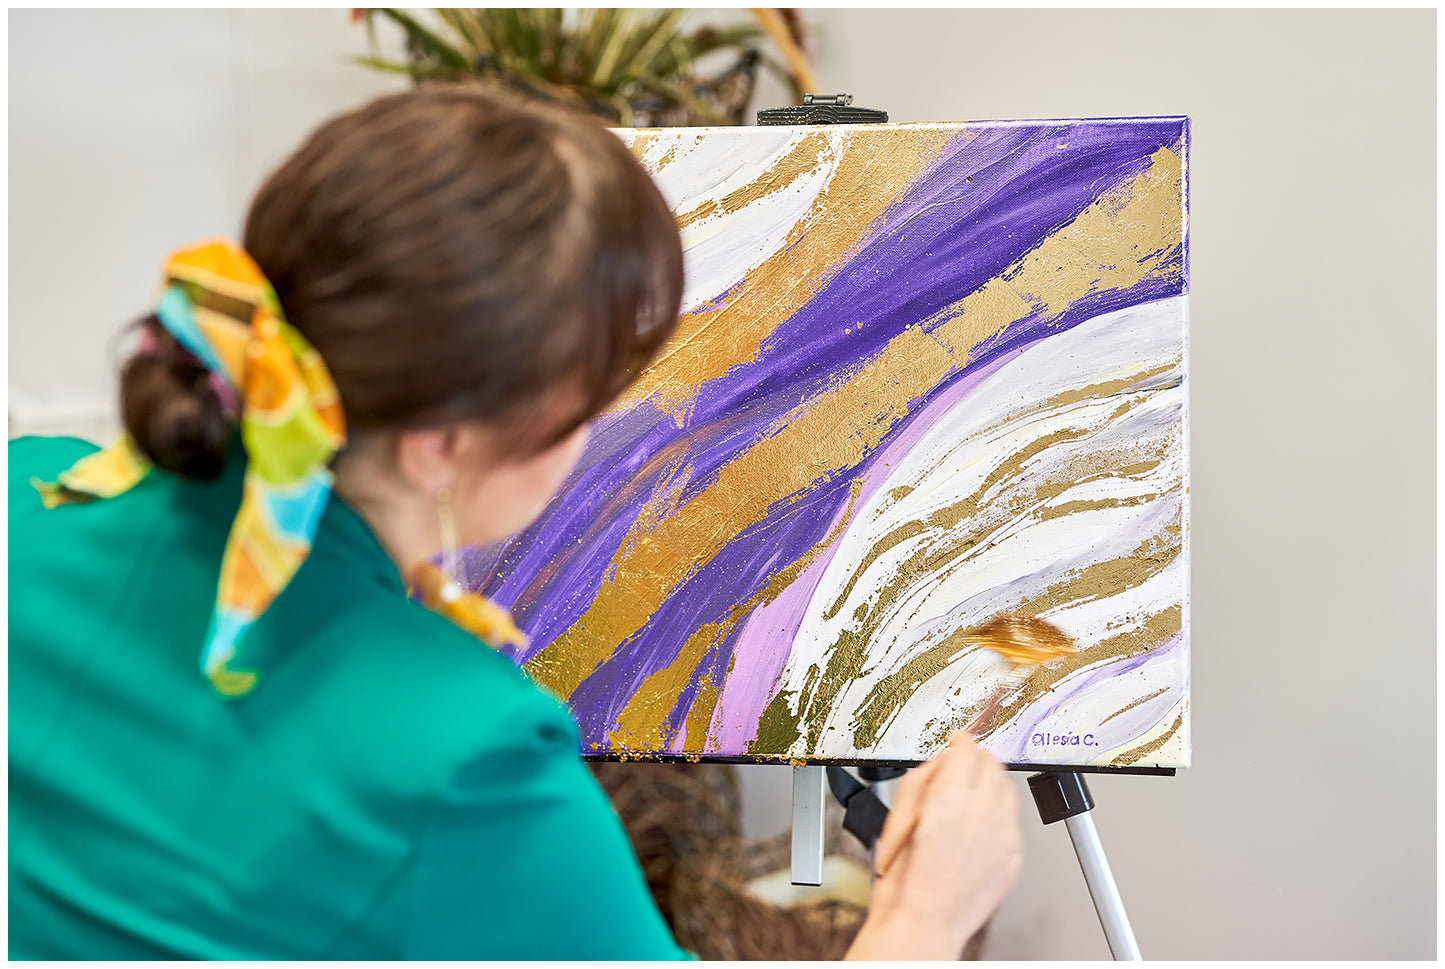 Artist Alesia Chaika Abstract painting applying gold foil on canvas private class in Chicago IL Buffalo Grove 1